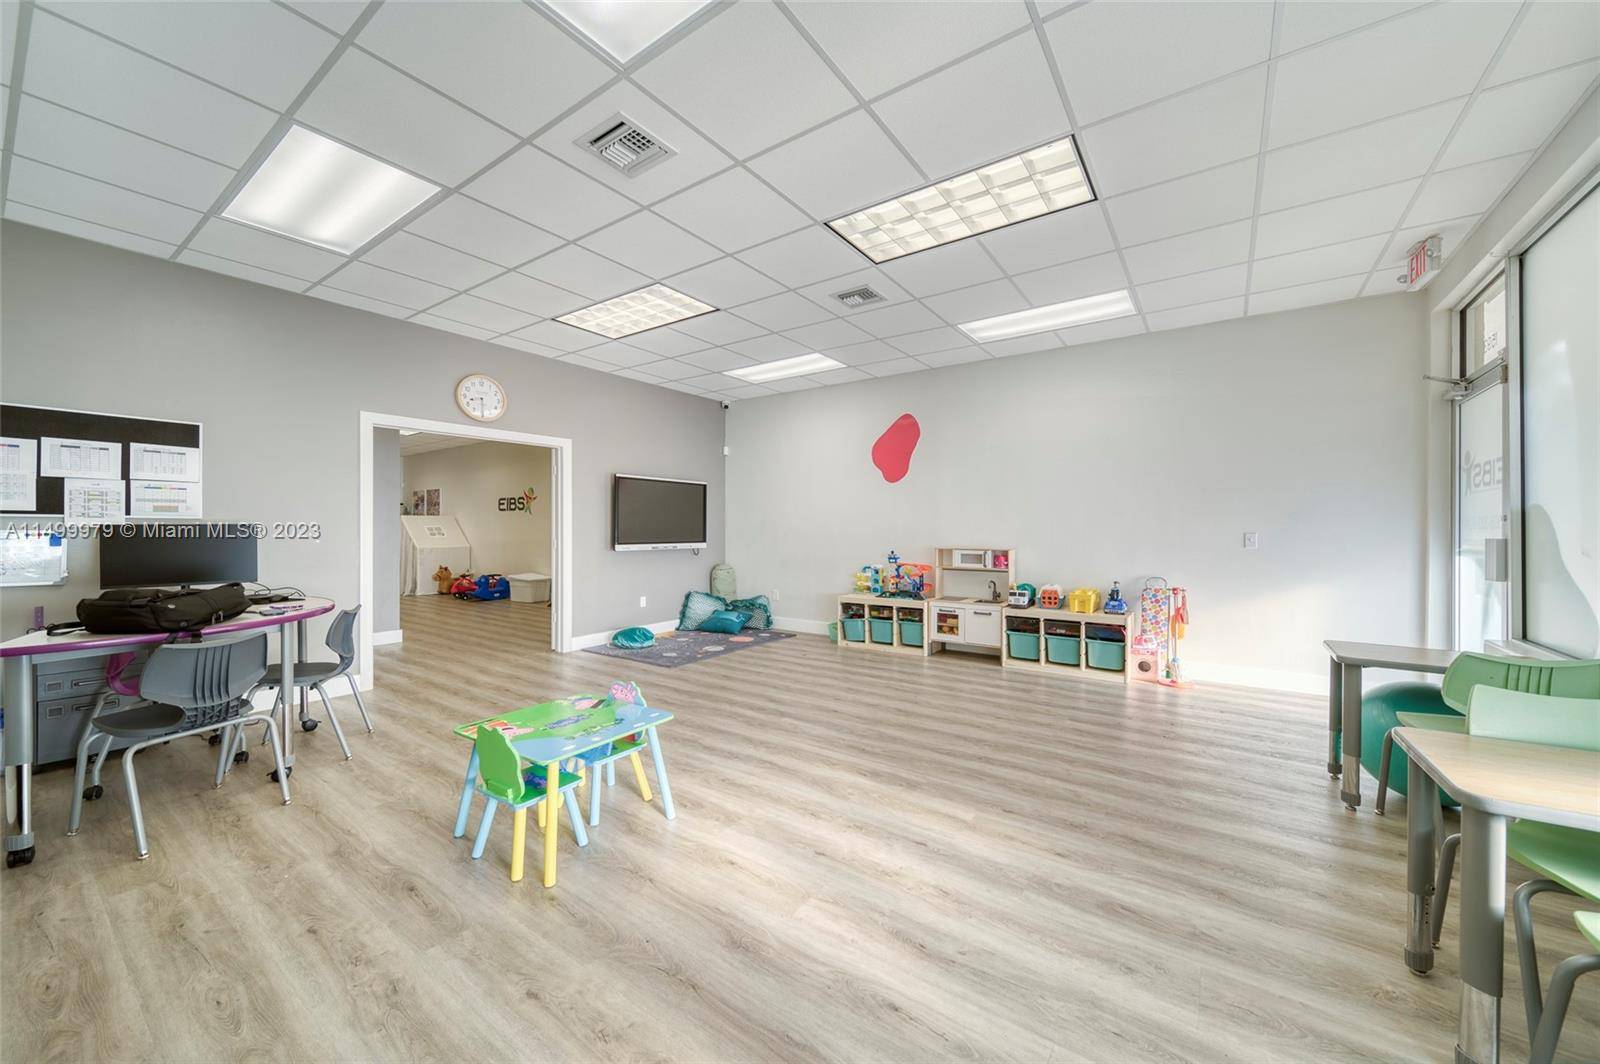 This 1200 square foot prime space in Palmetto Bay is perfect for a behavioral analysis center.